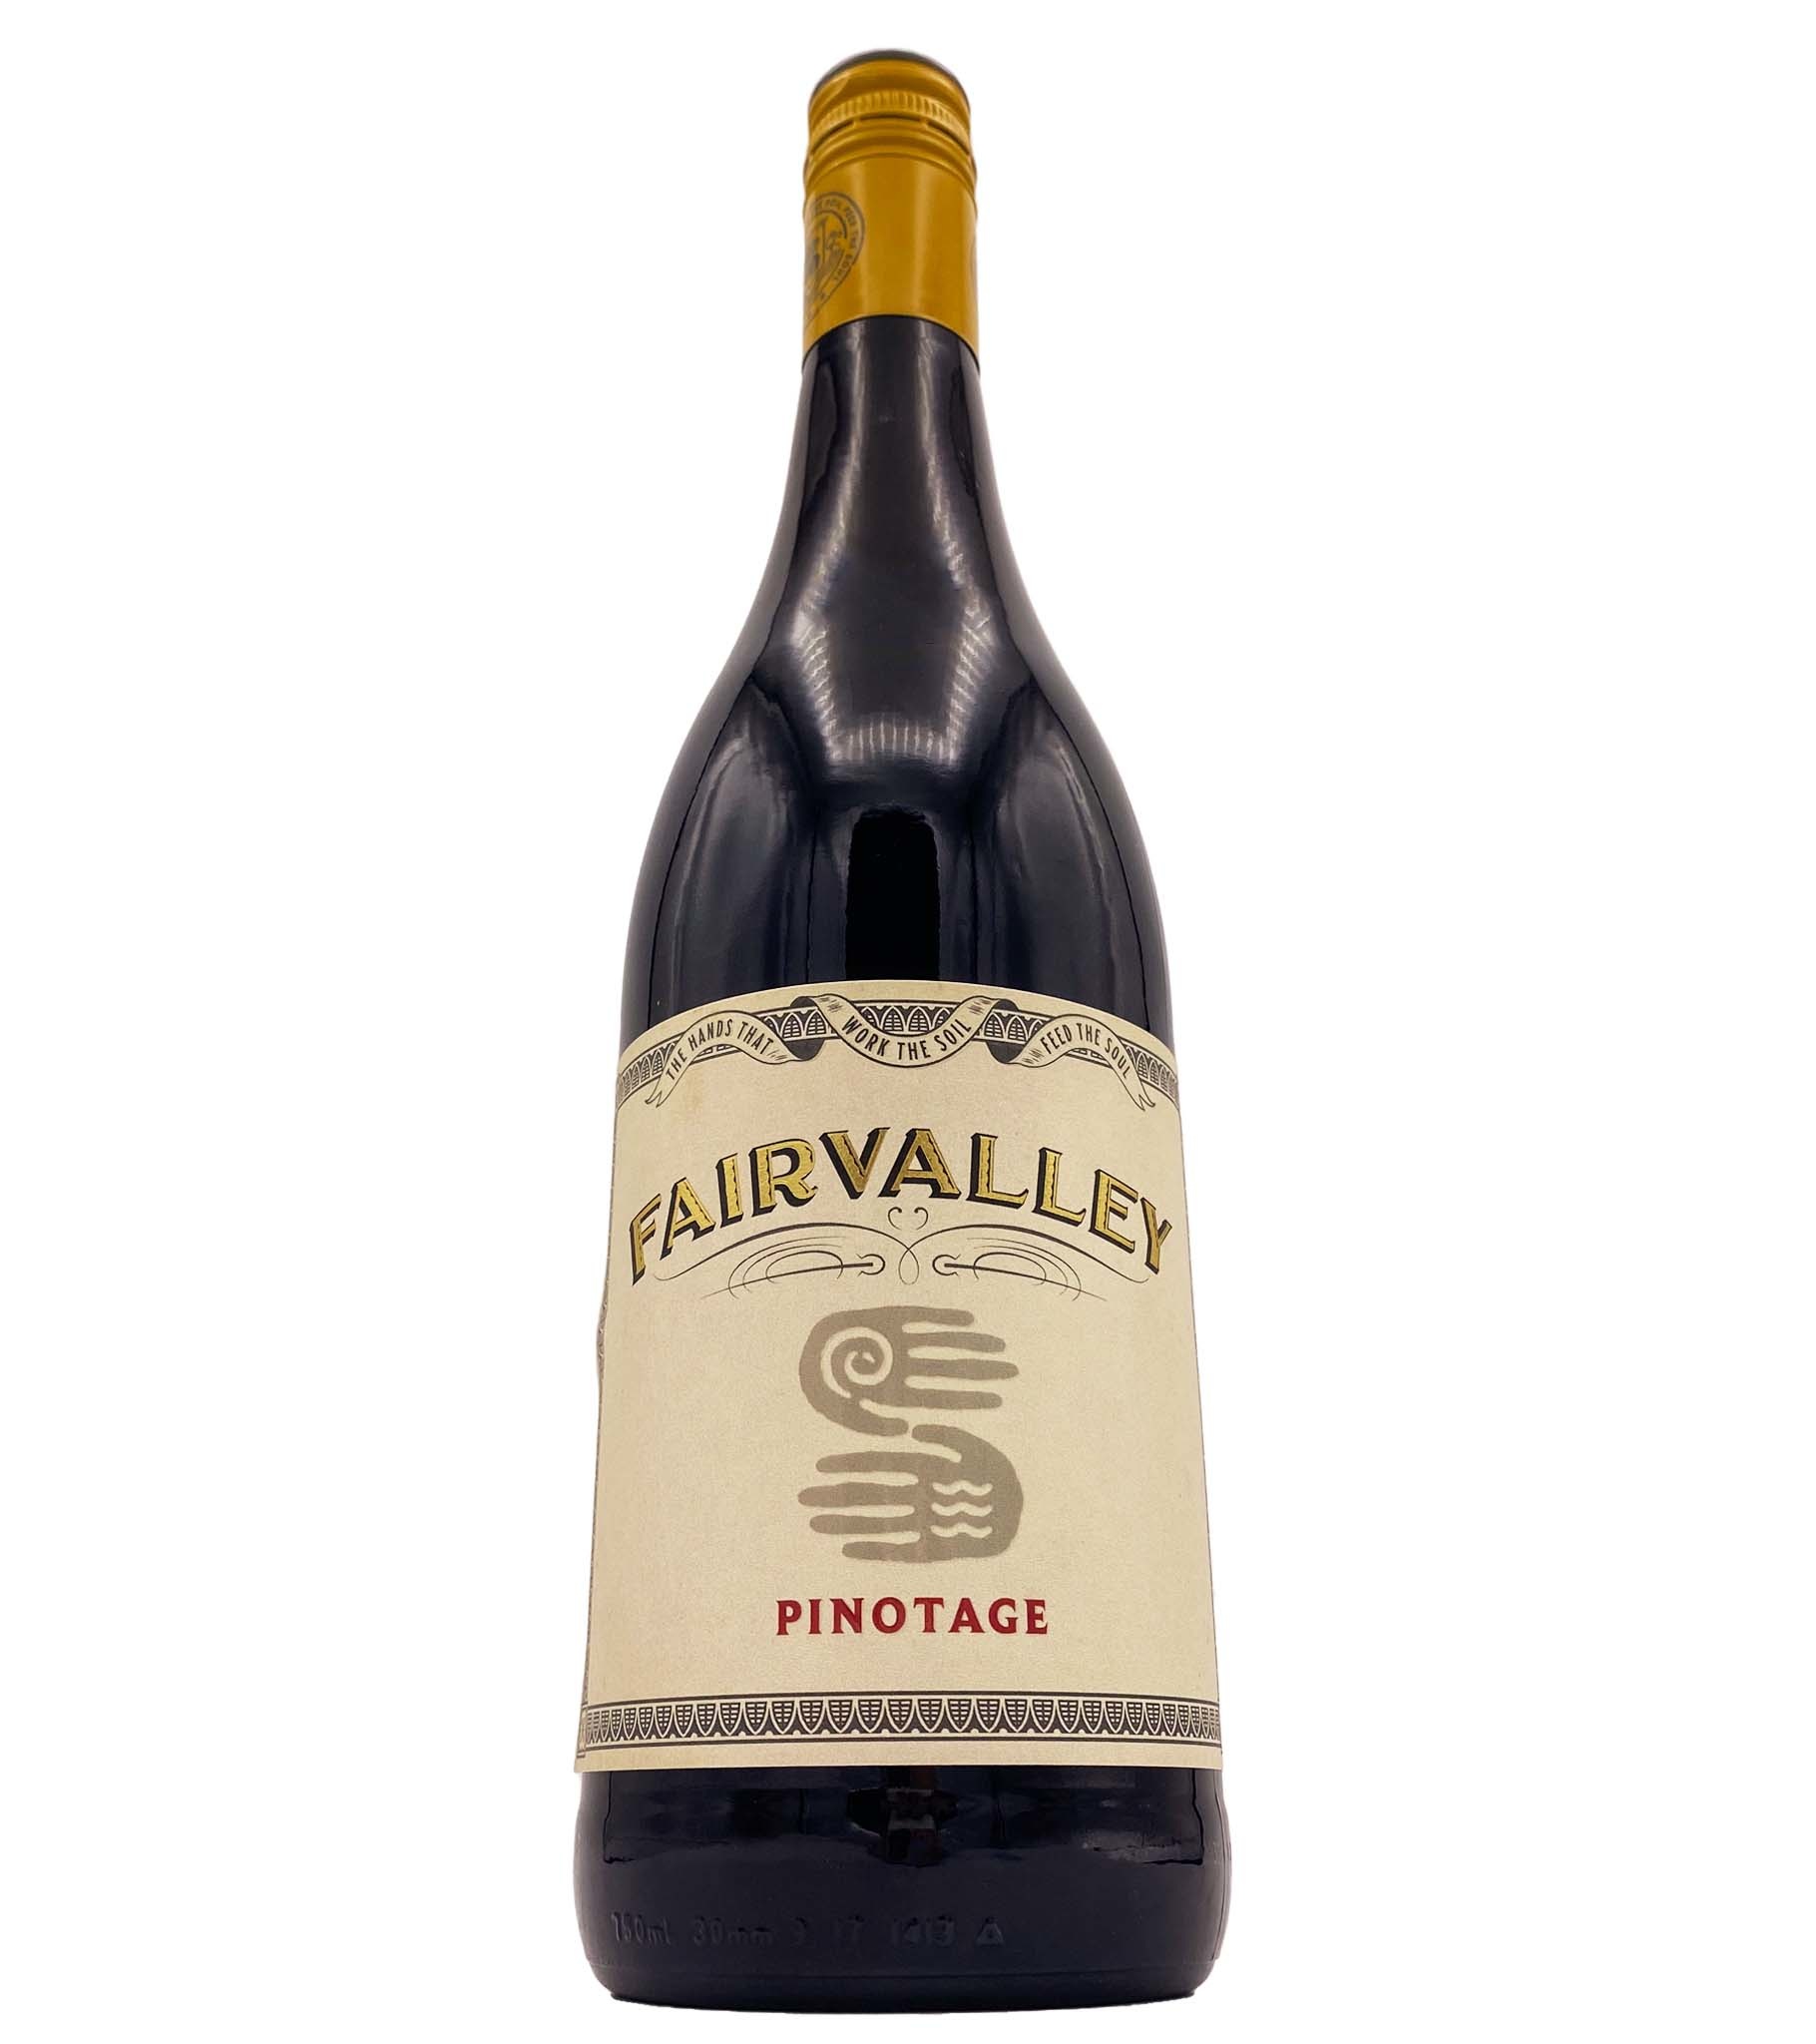 Pinotage 2019 Fairvalley